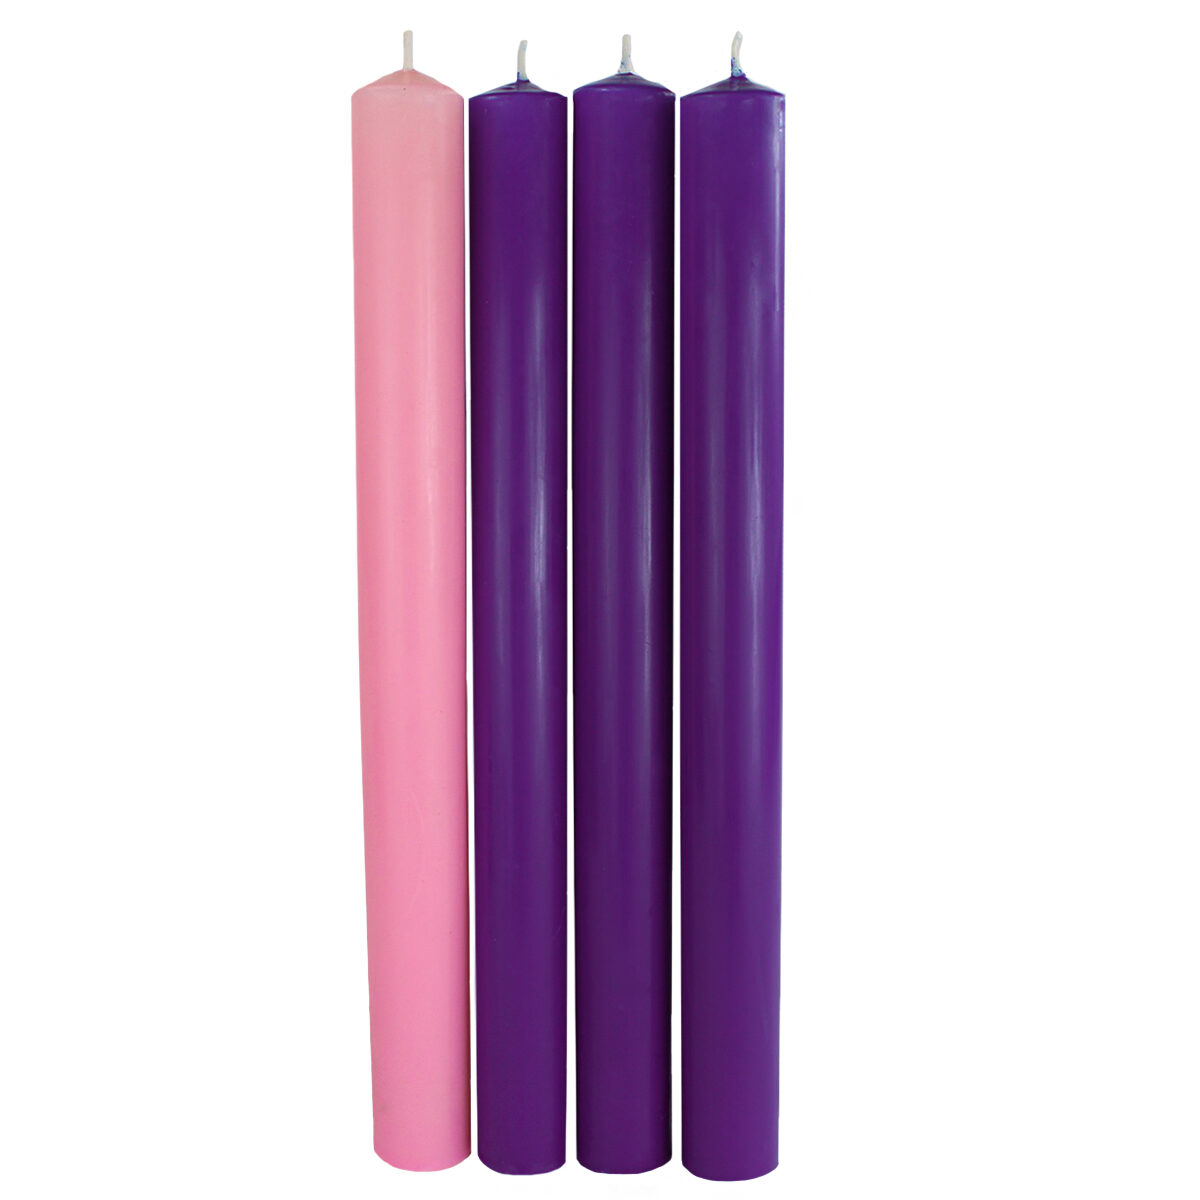 1.5" x 15" ADVENT TAPER CANDLES with 51% BEESWAX (3 Purple & 1 Pink)